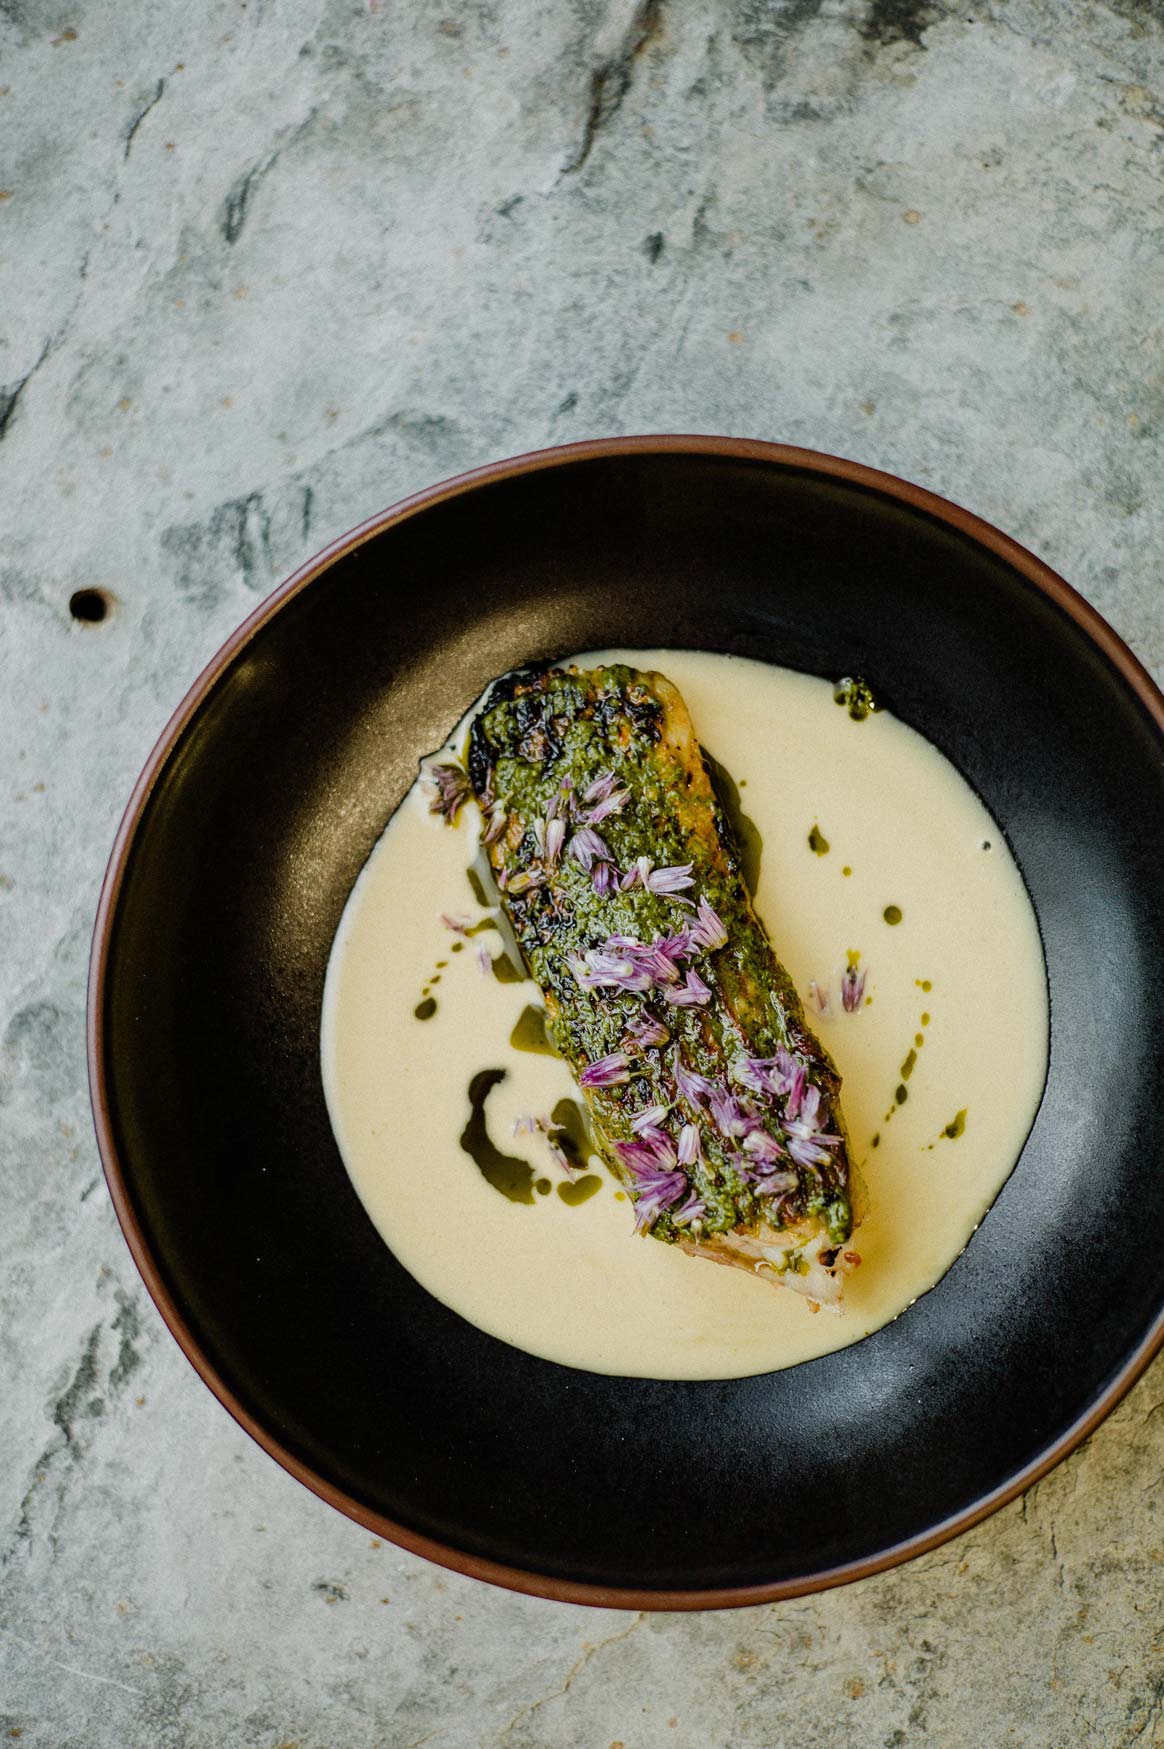 Fish topped with seasonal herbs and wild flowers